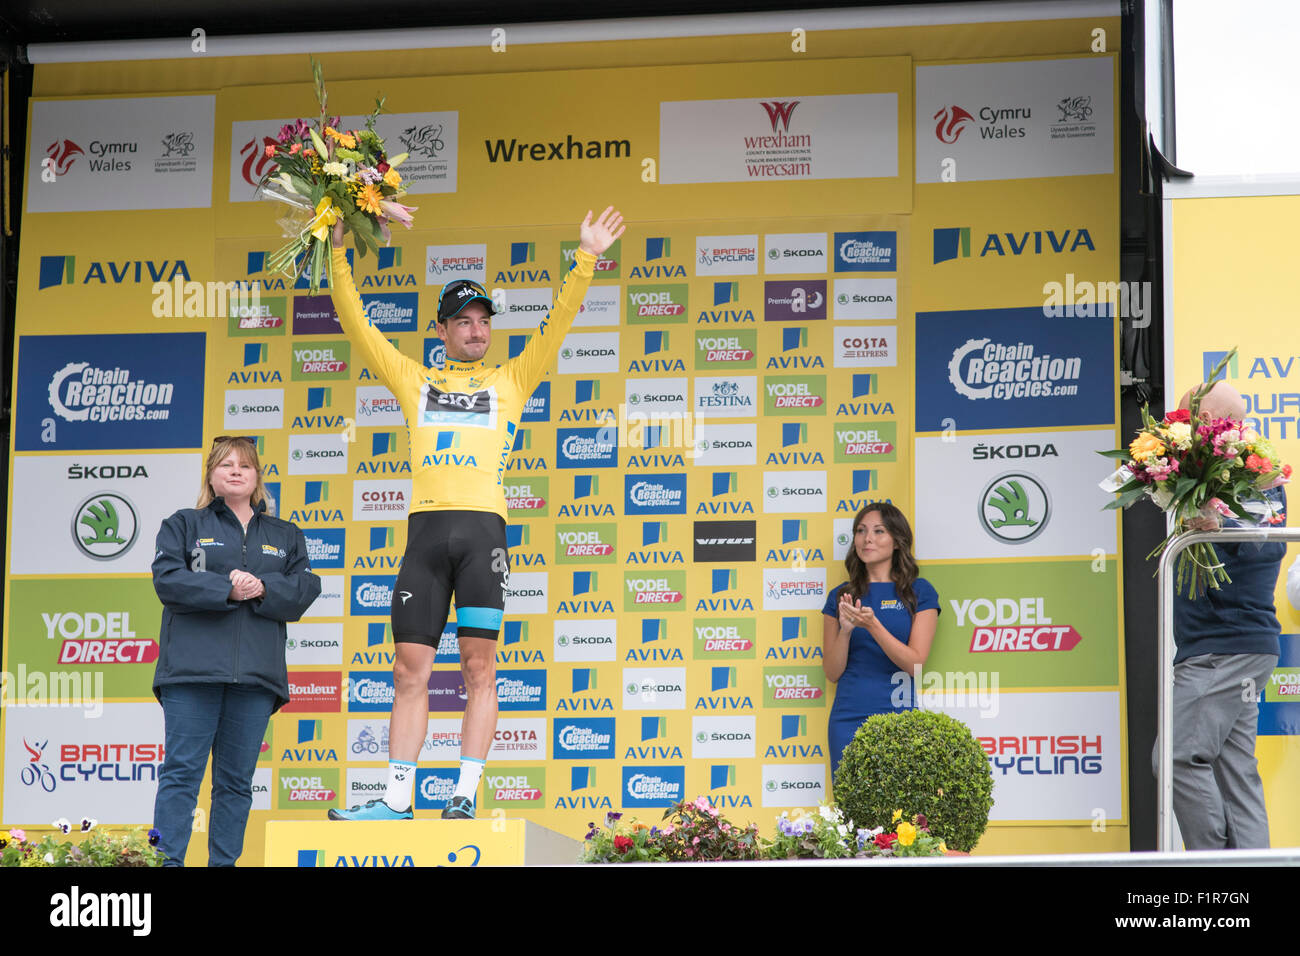 London, UK. 6th September, 2015. Race leader Elia Viviani wears the yellow jersey on the podium following stage one of the Aviva Tour of Britain between Beaumaris and Wrexham, United Kingdom on 6 September 2015. The race starts on 6 September in Beaumaris, Anglesey, and ends on 13 August in London, United Kingdom. Credit:  Andrew Peat/Alamy Live News Stock Photo